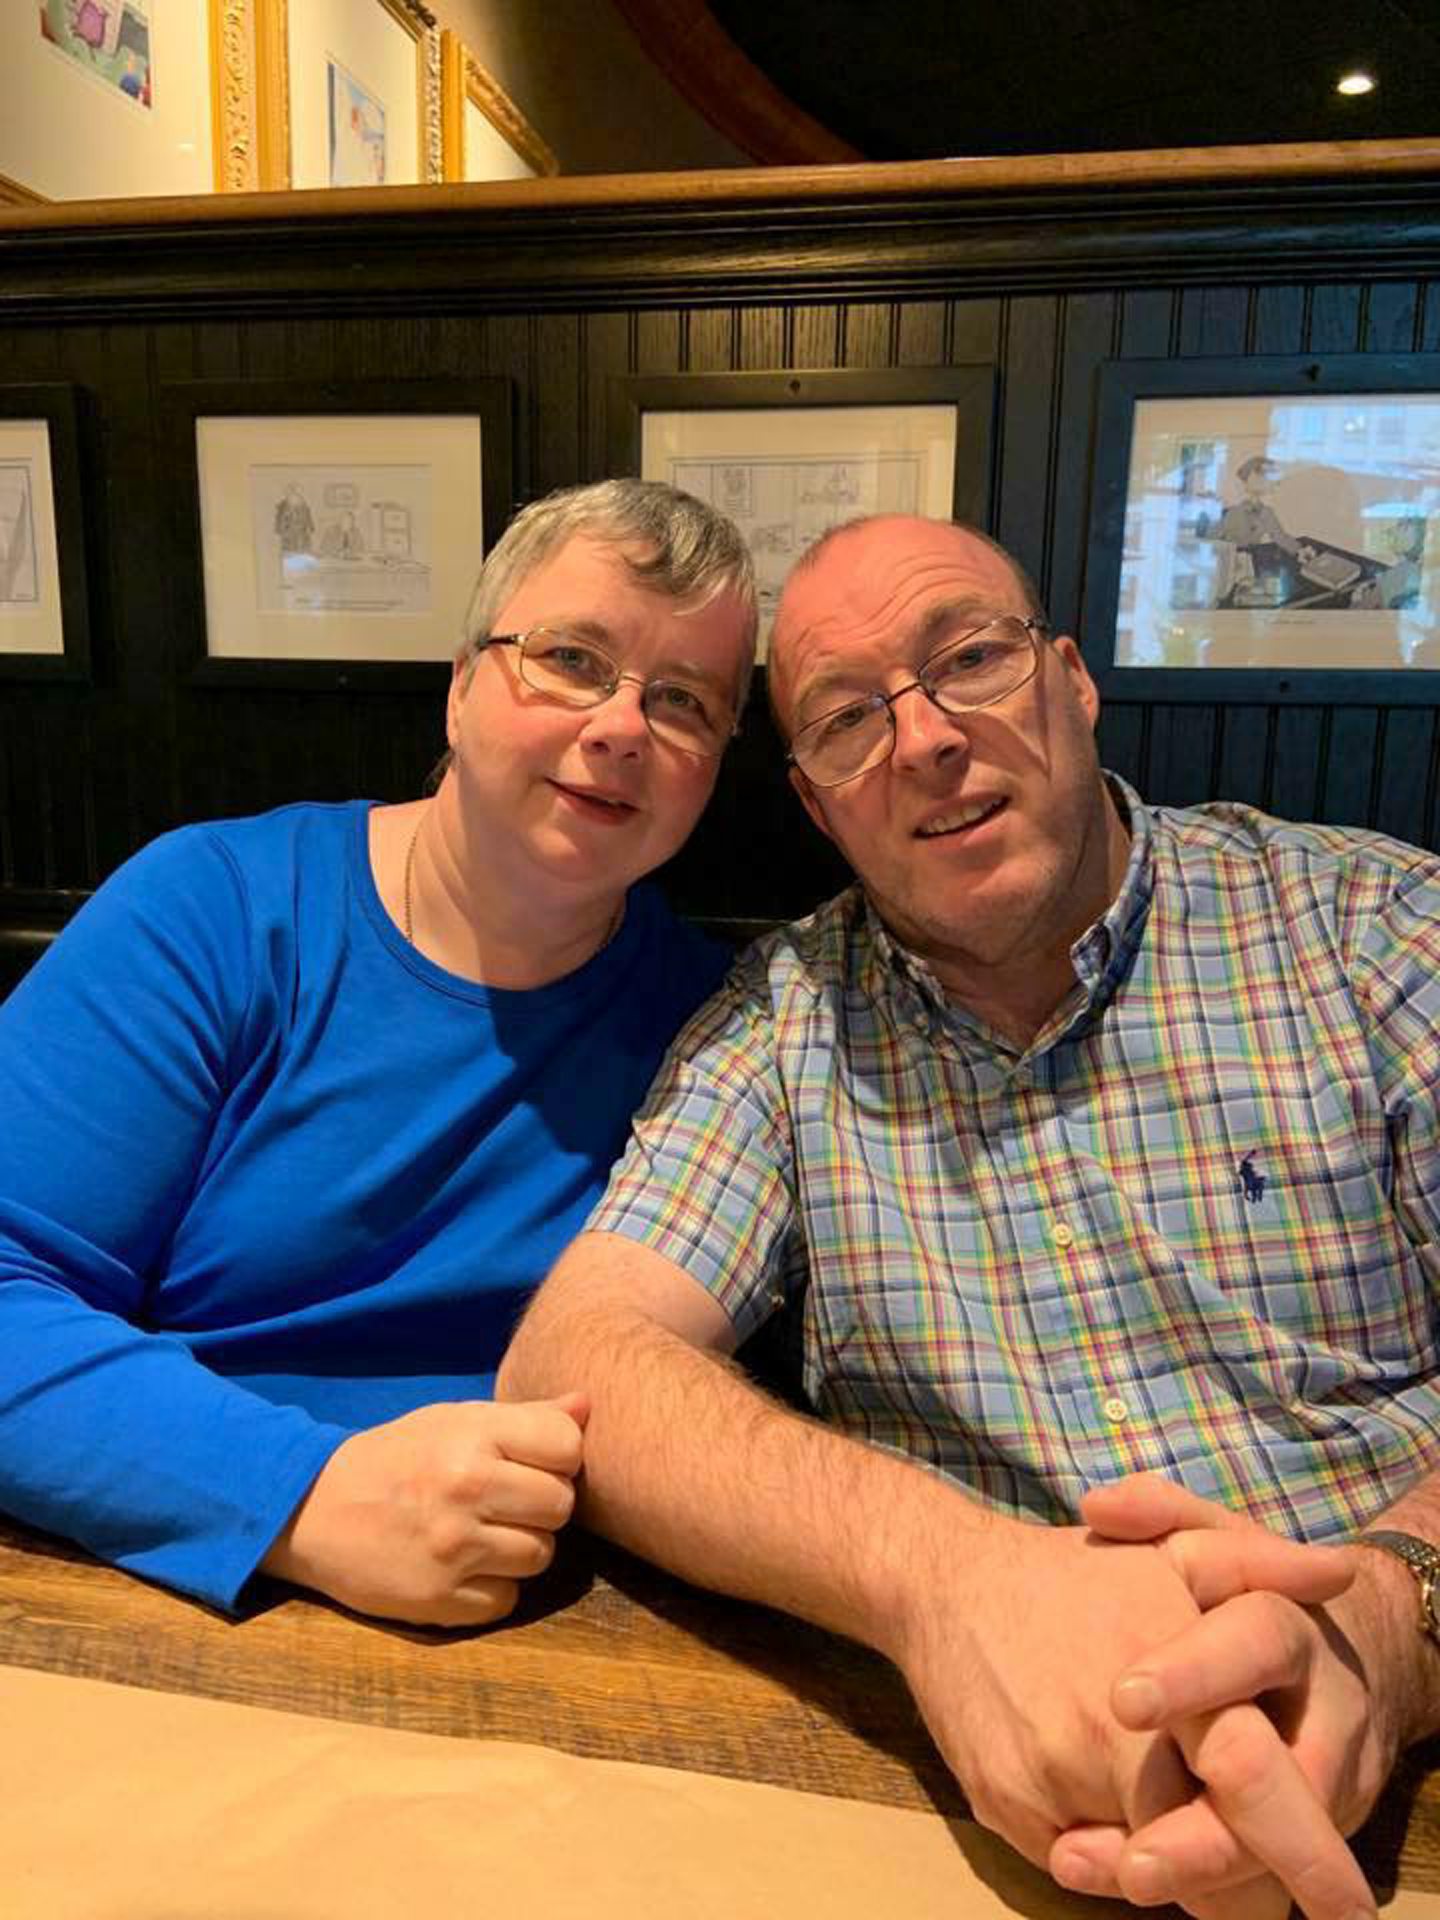 A recent picture of Karen and Ian Forbes, looking happy.